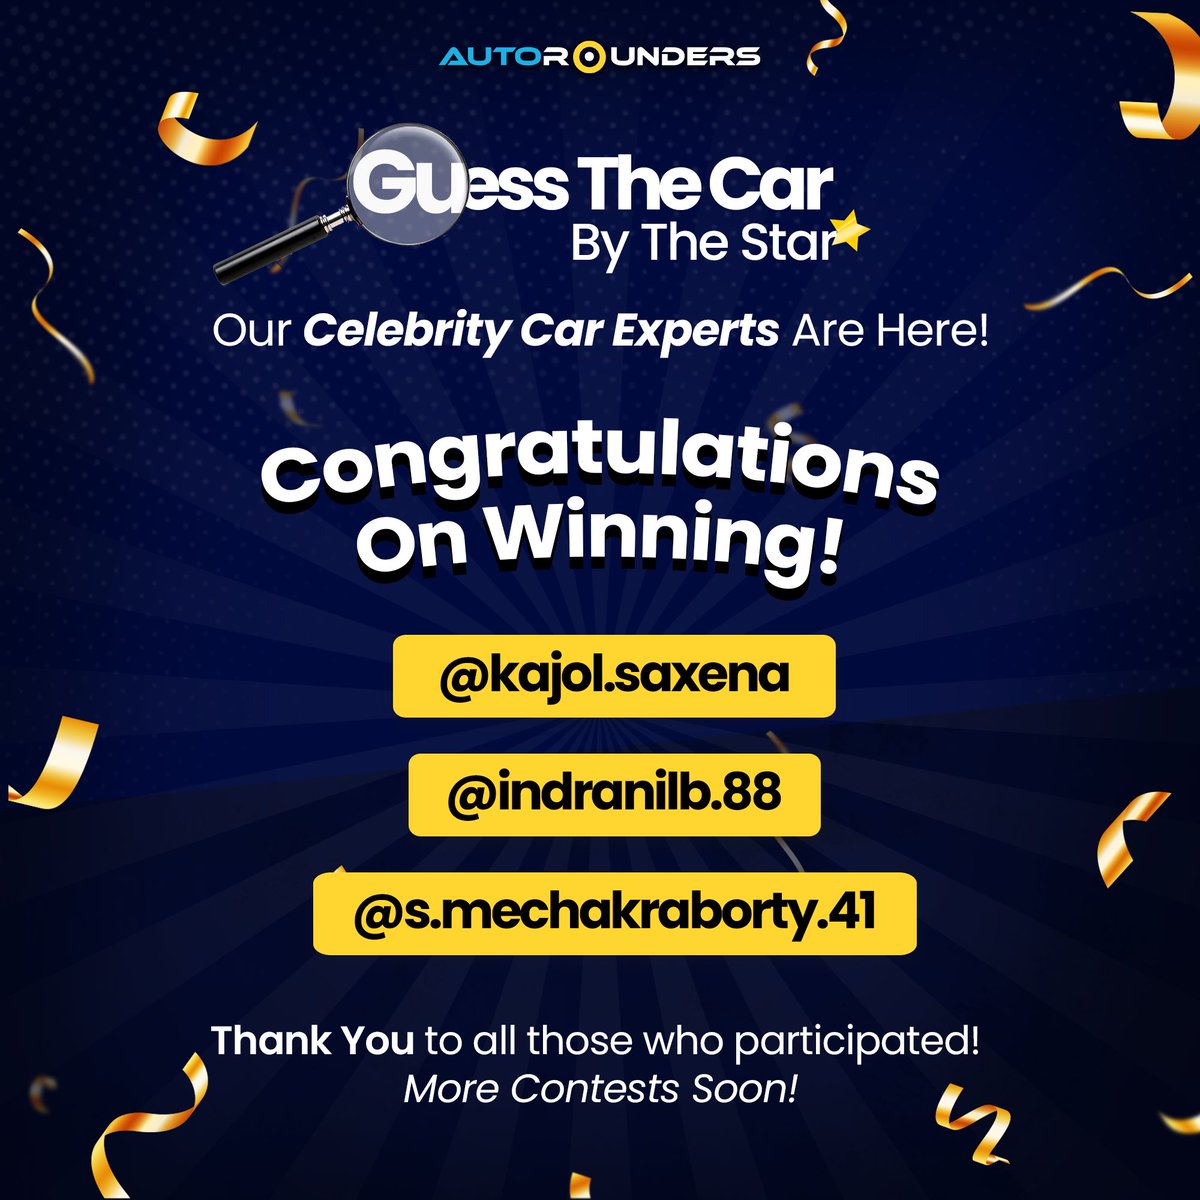 Winner Winner ‼️ Meet our #GuessTheCayByTheStar winners @kajol.saxena, @indranilb.88, and s.mechakraborty.41🥳 Thank You all for your continued support and for helping us reach 200K subscribers on YouTube! #Mumbai #Hyderabad #Pune #Thane #ThaneGBRoad